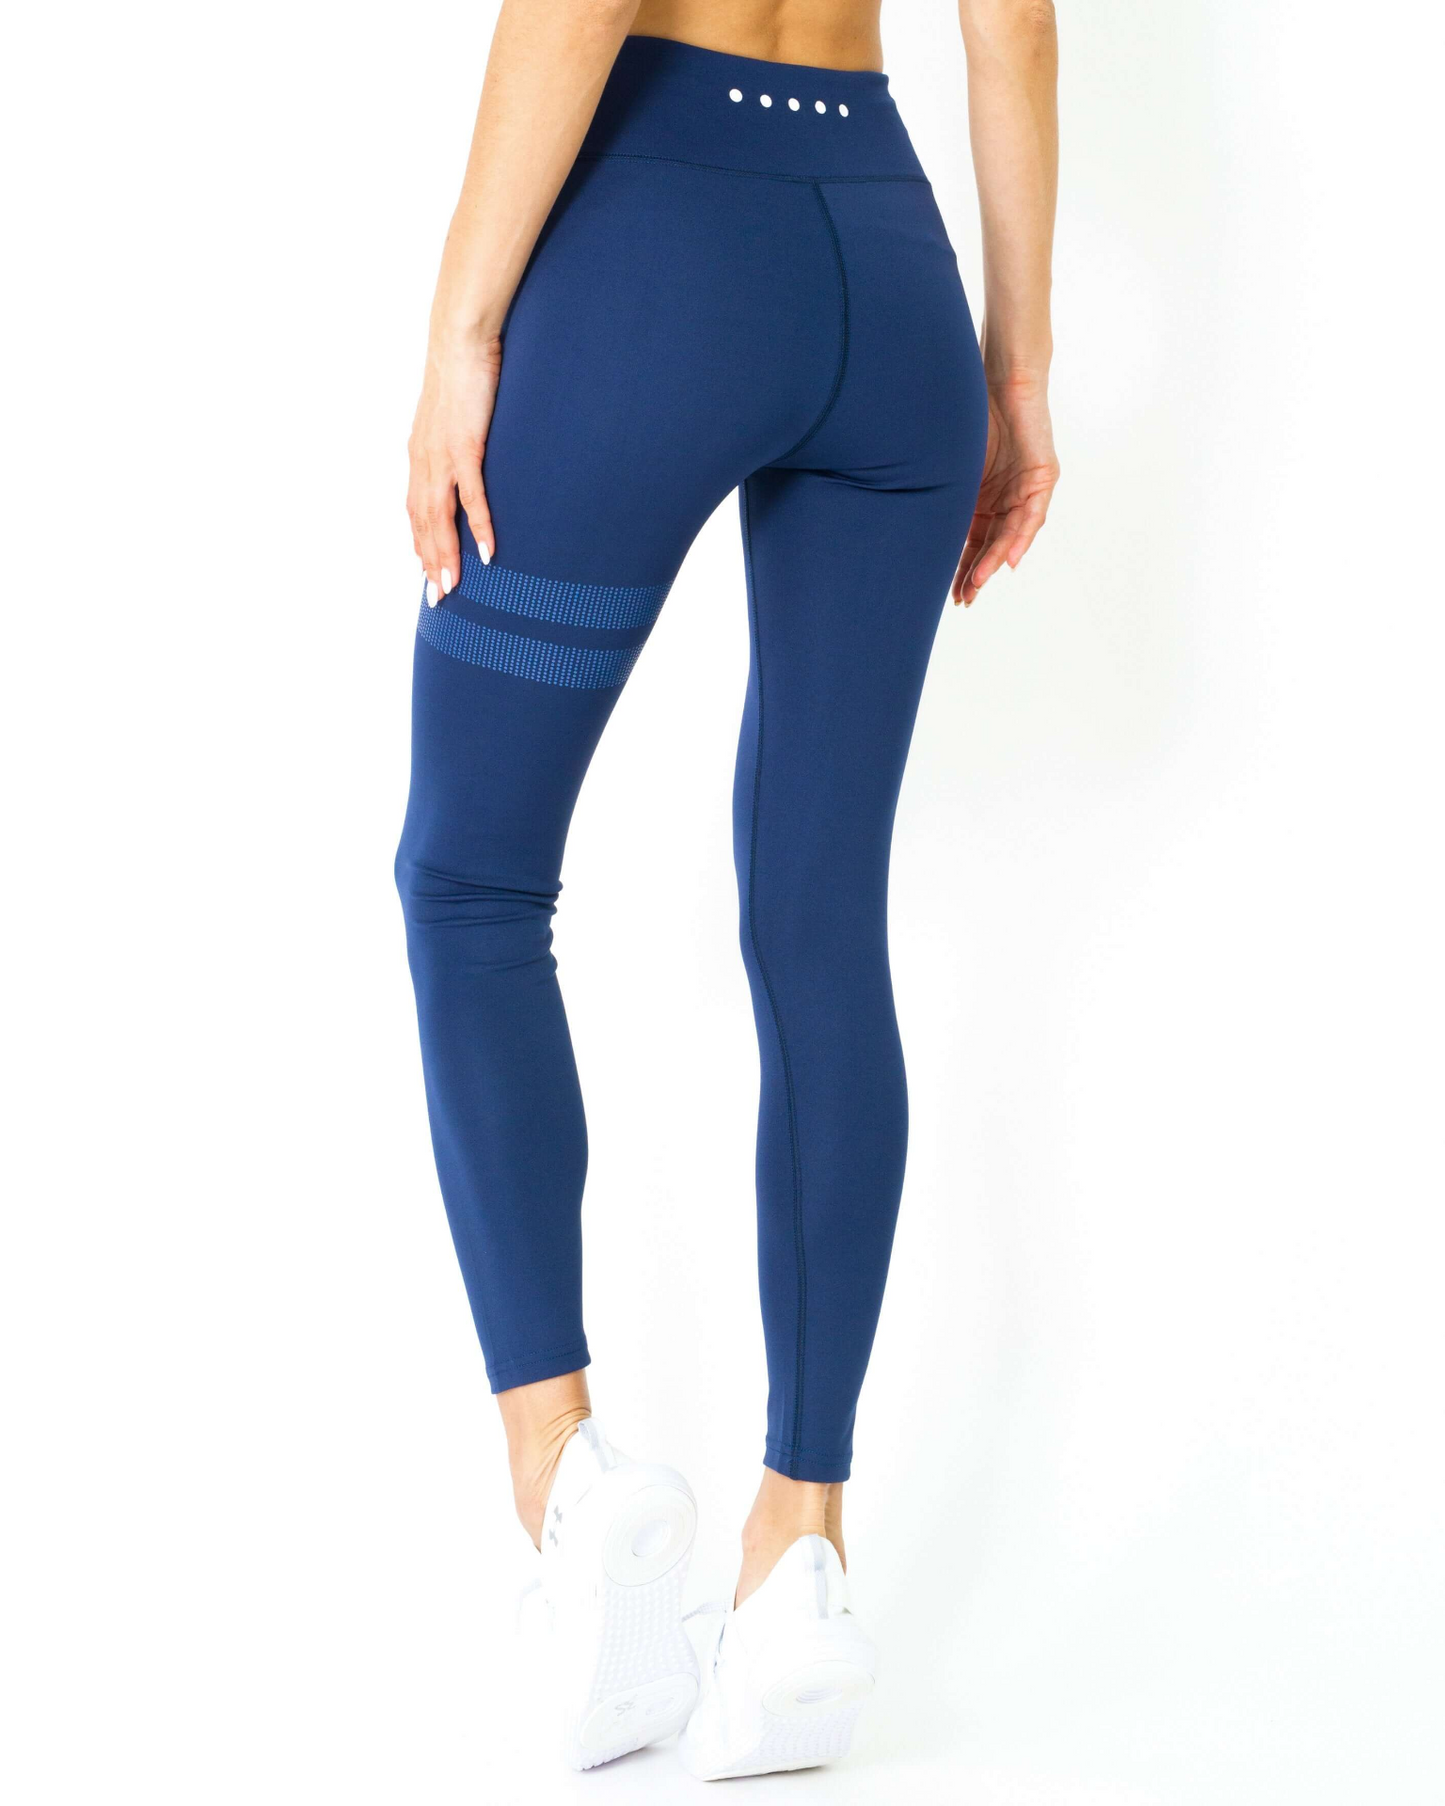 Ashton Athletic High-Waisted Leggings - Stylish and Sculpted Compression Fit